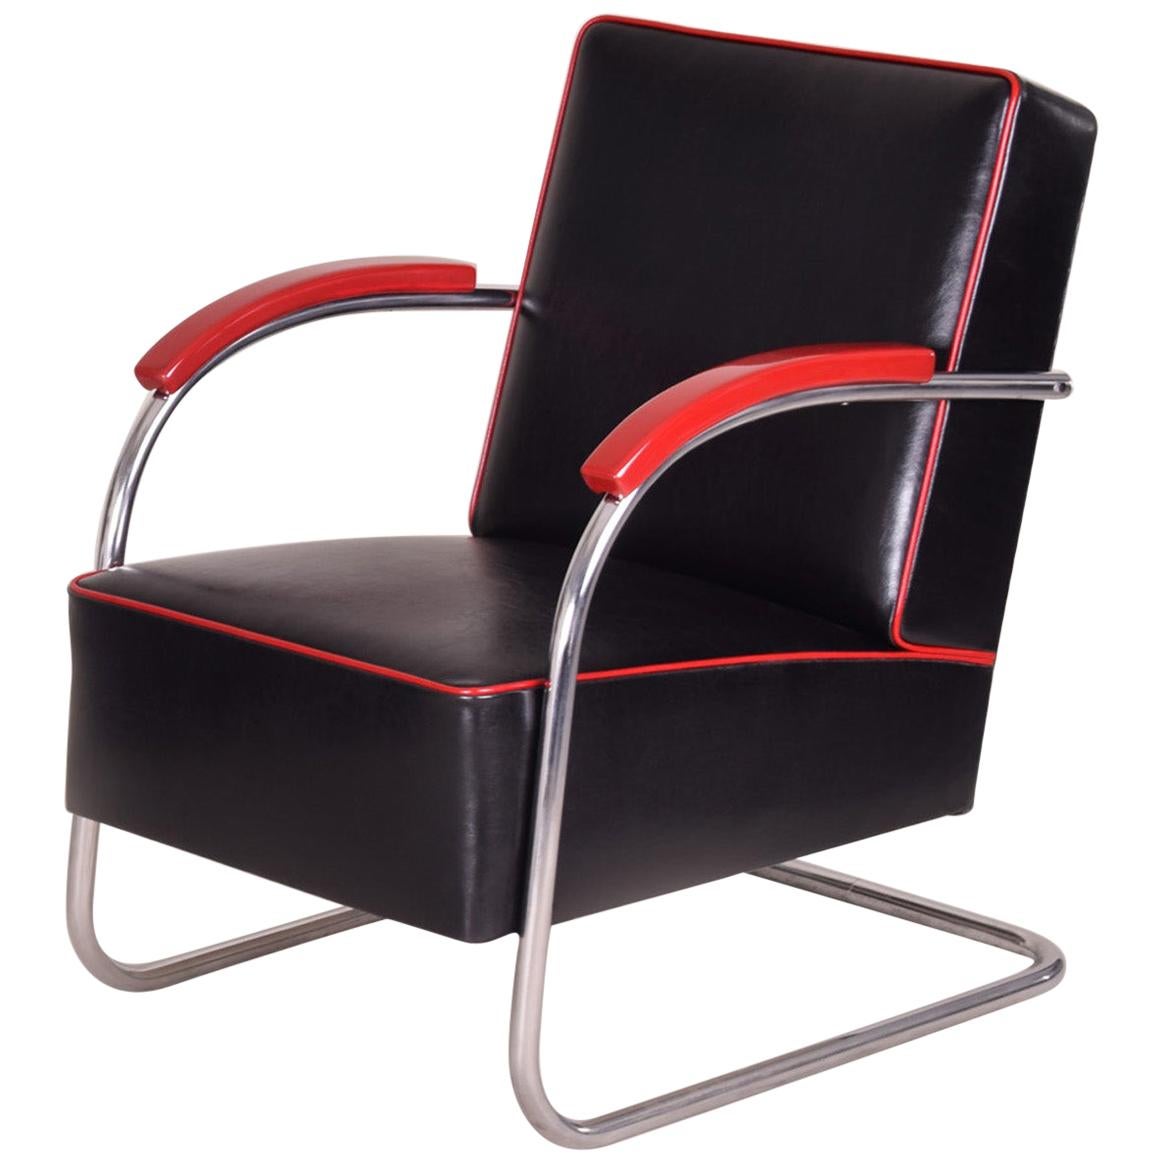 Black Tubular Steel Cantilever Armchair, Chrome, New Leather and Upholstery